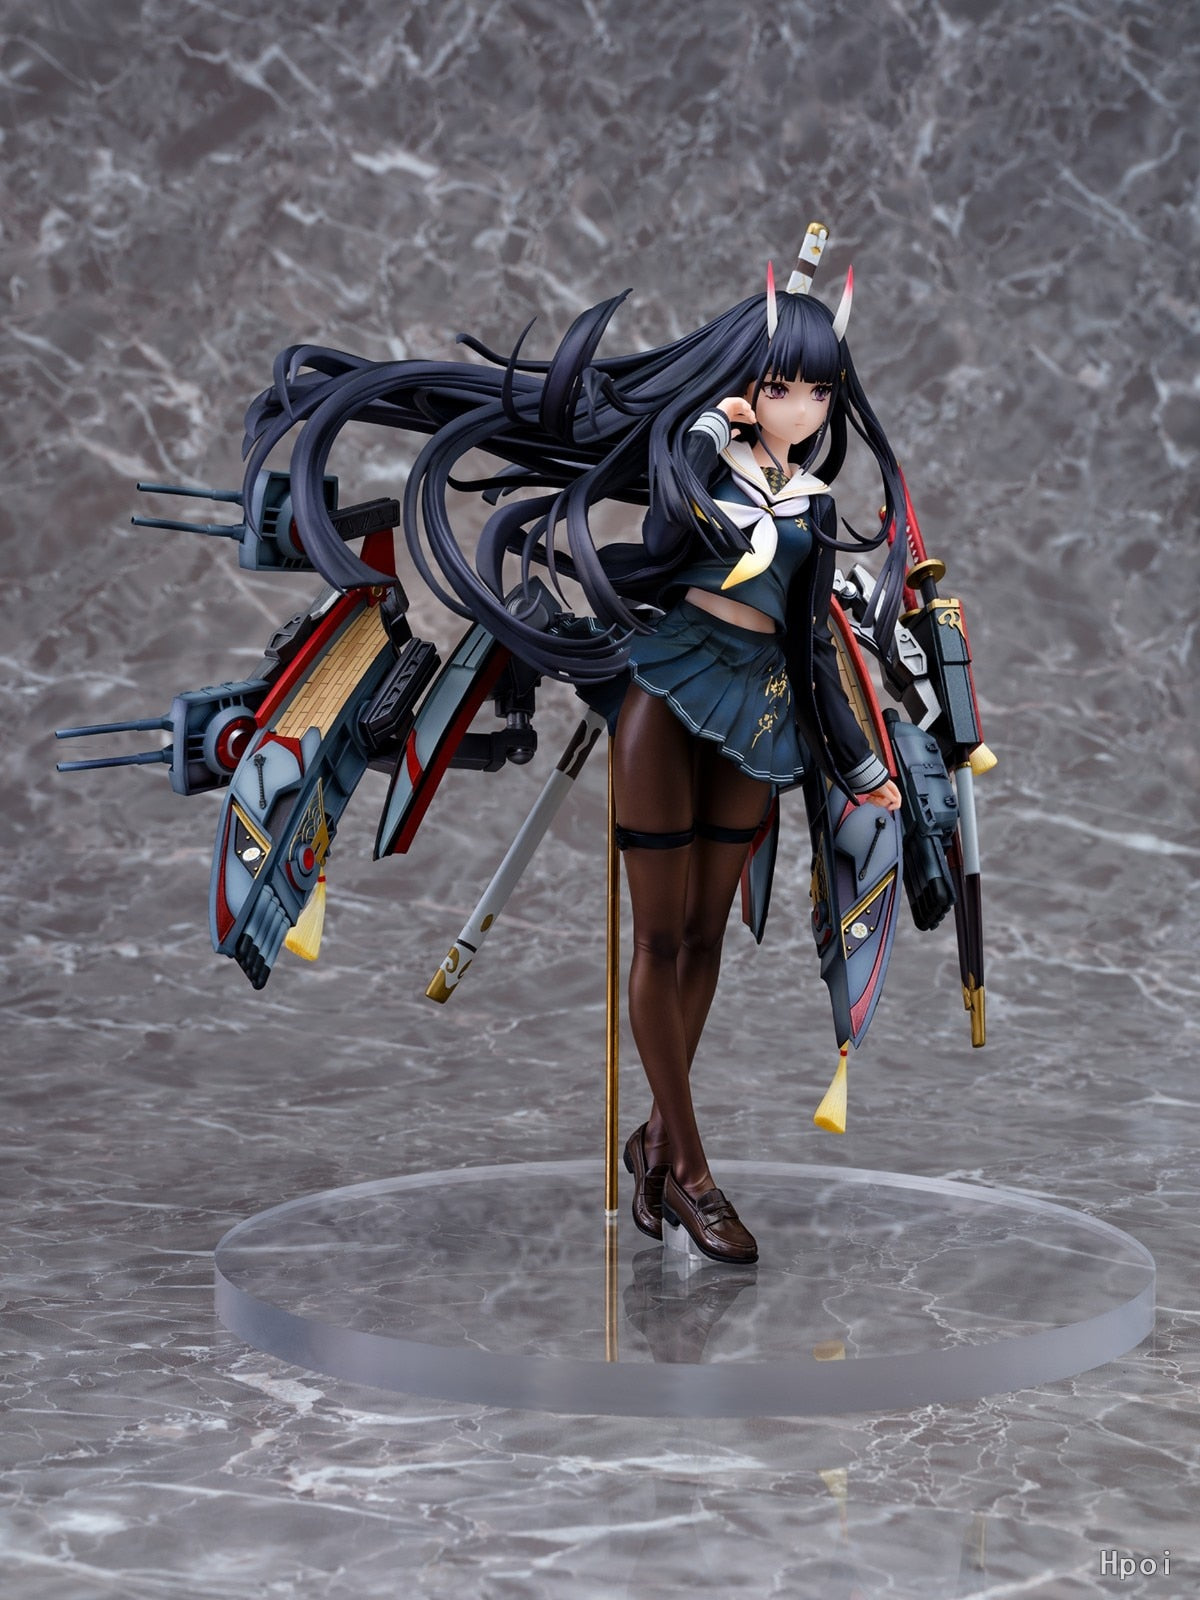 This figurine captures Noshiro commanding presence, tactical mind, & unwavering resolve. If you are looking for more Azur Lane Merch, We have it all! | Check out all our Anime Merch now!